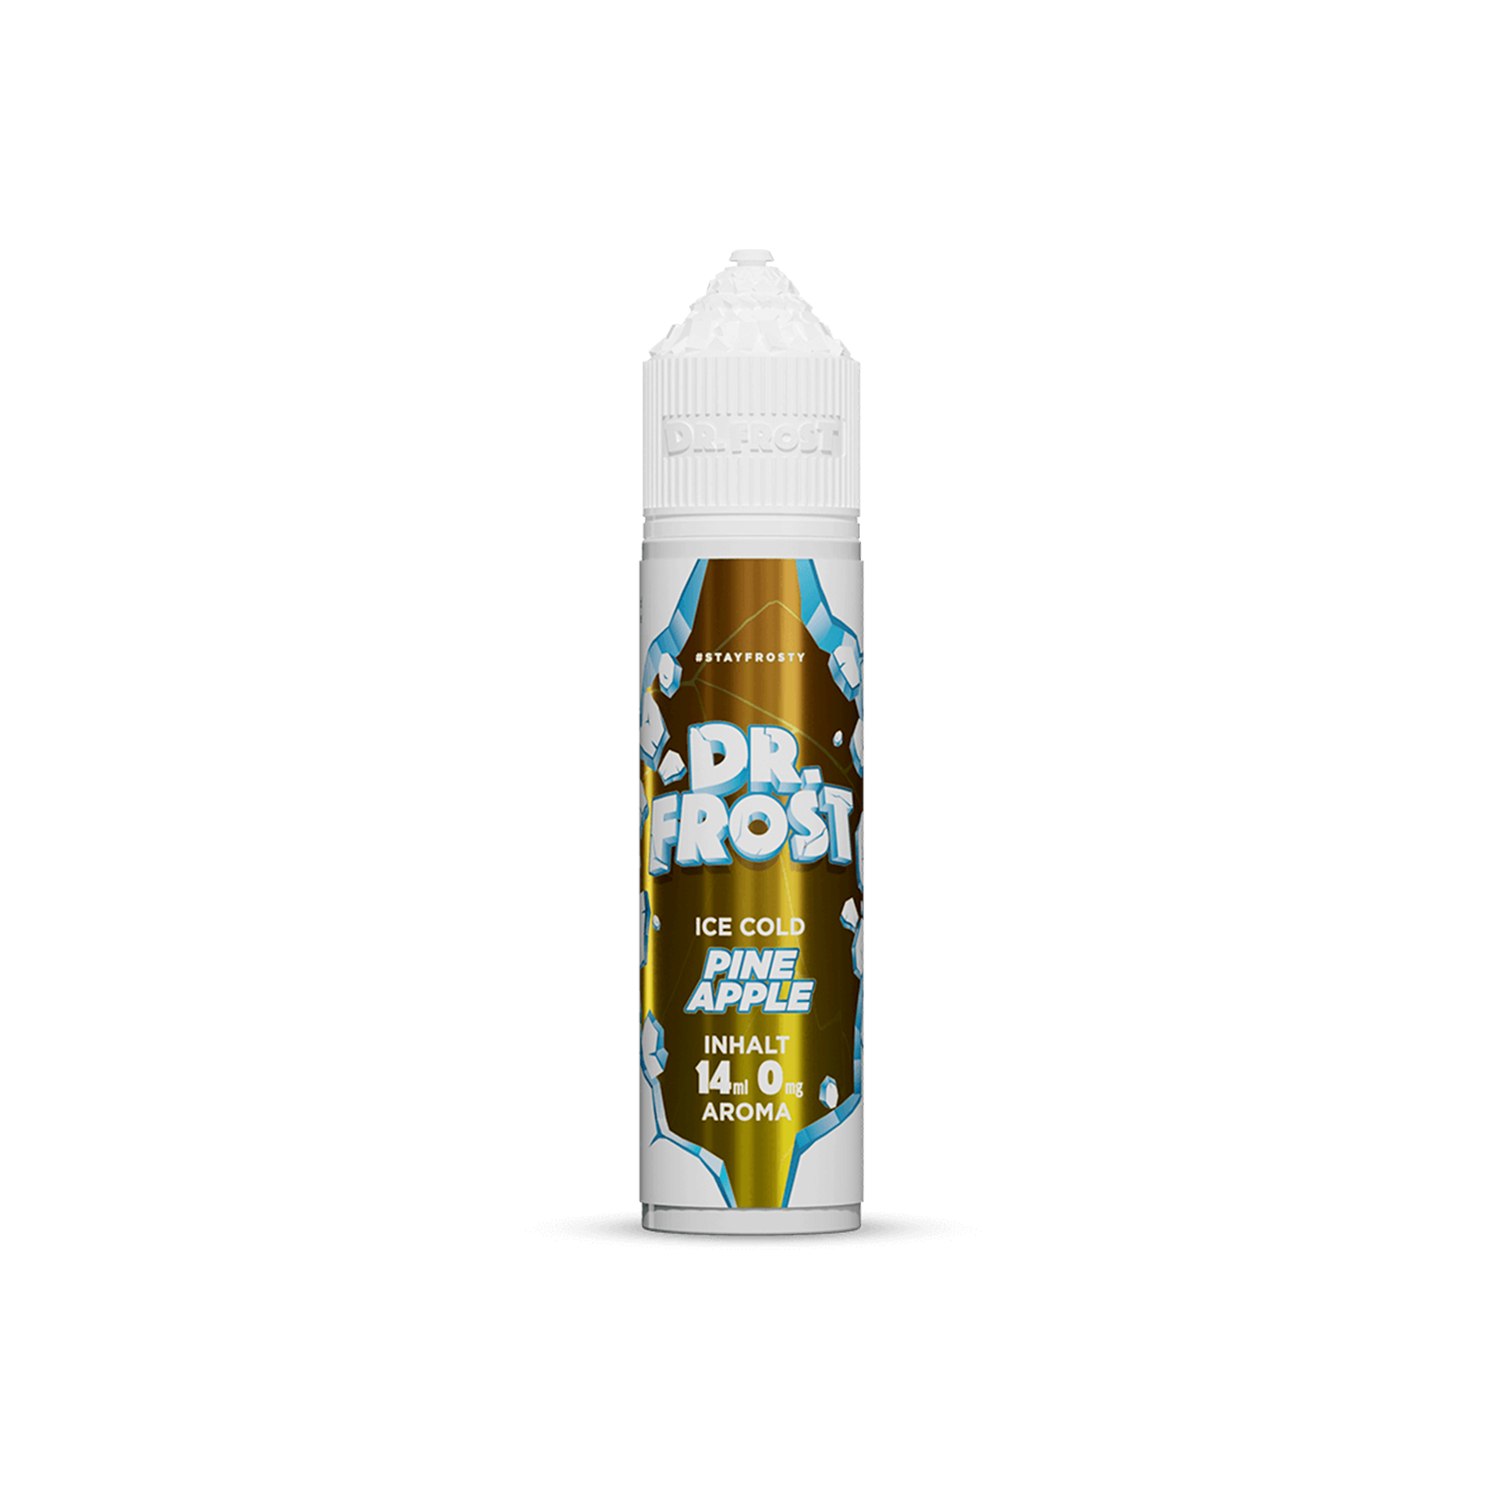 Dr. Frost - Ice Cold - Pineapple 14ml Aroma 